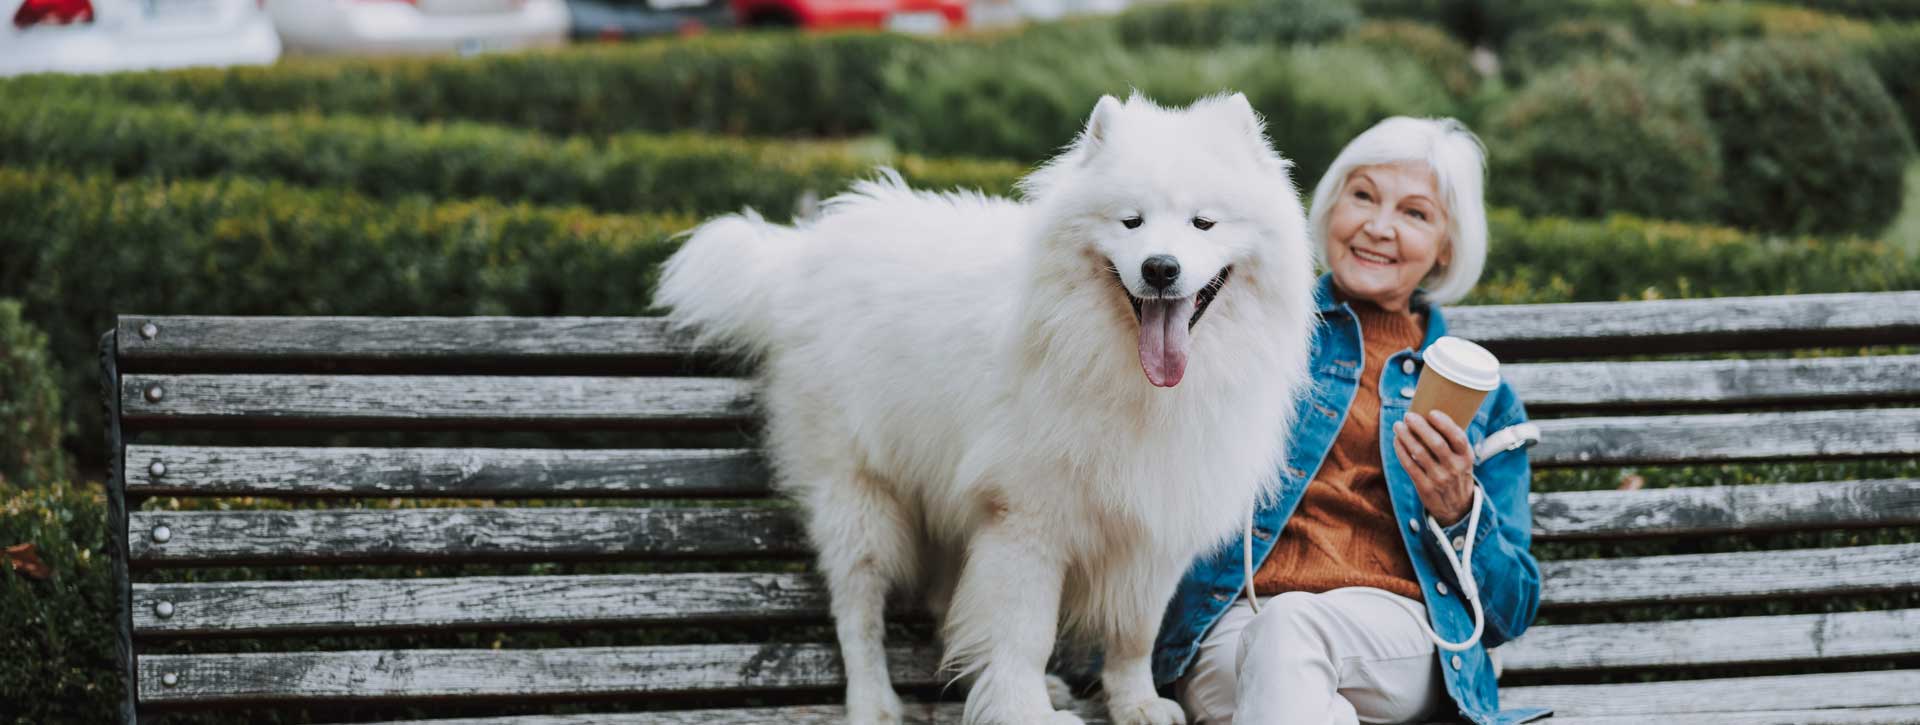 An older lady sits on a bench in the park with her large dog